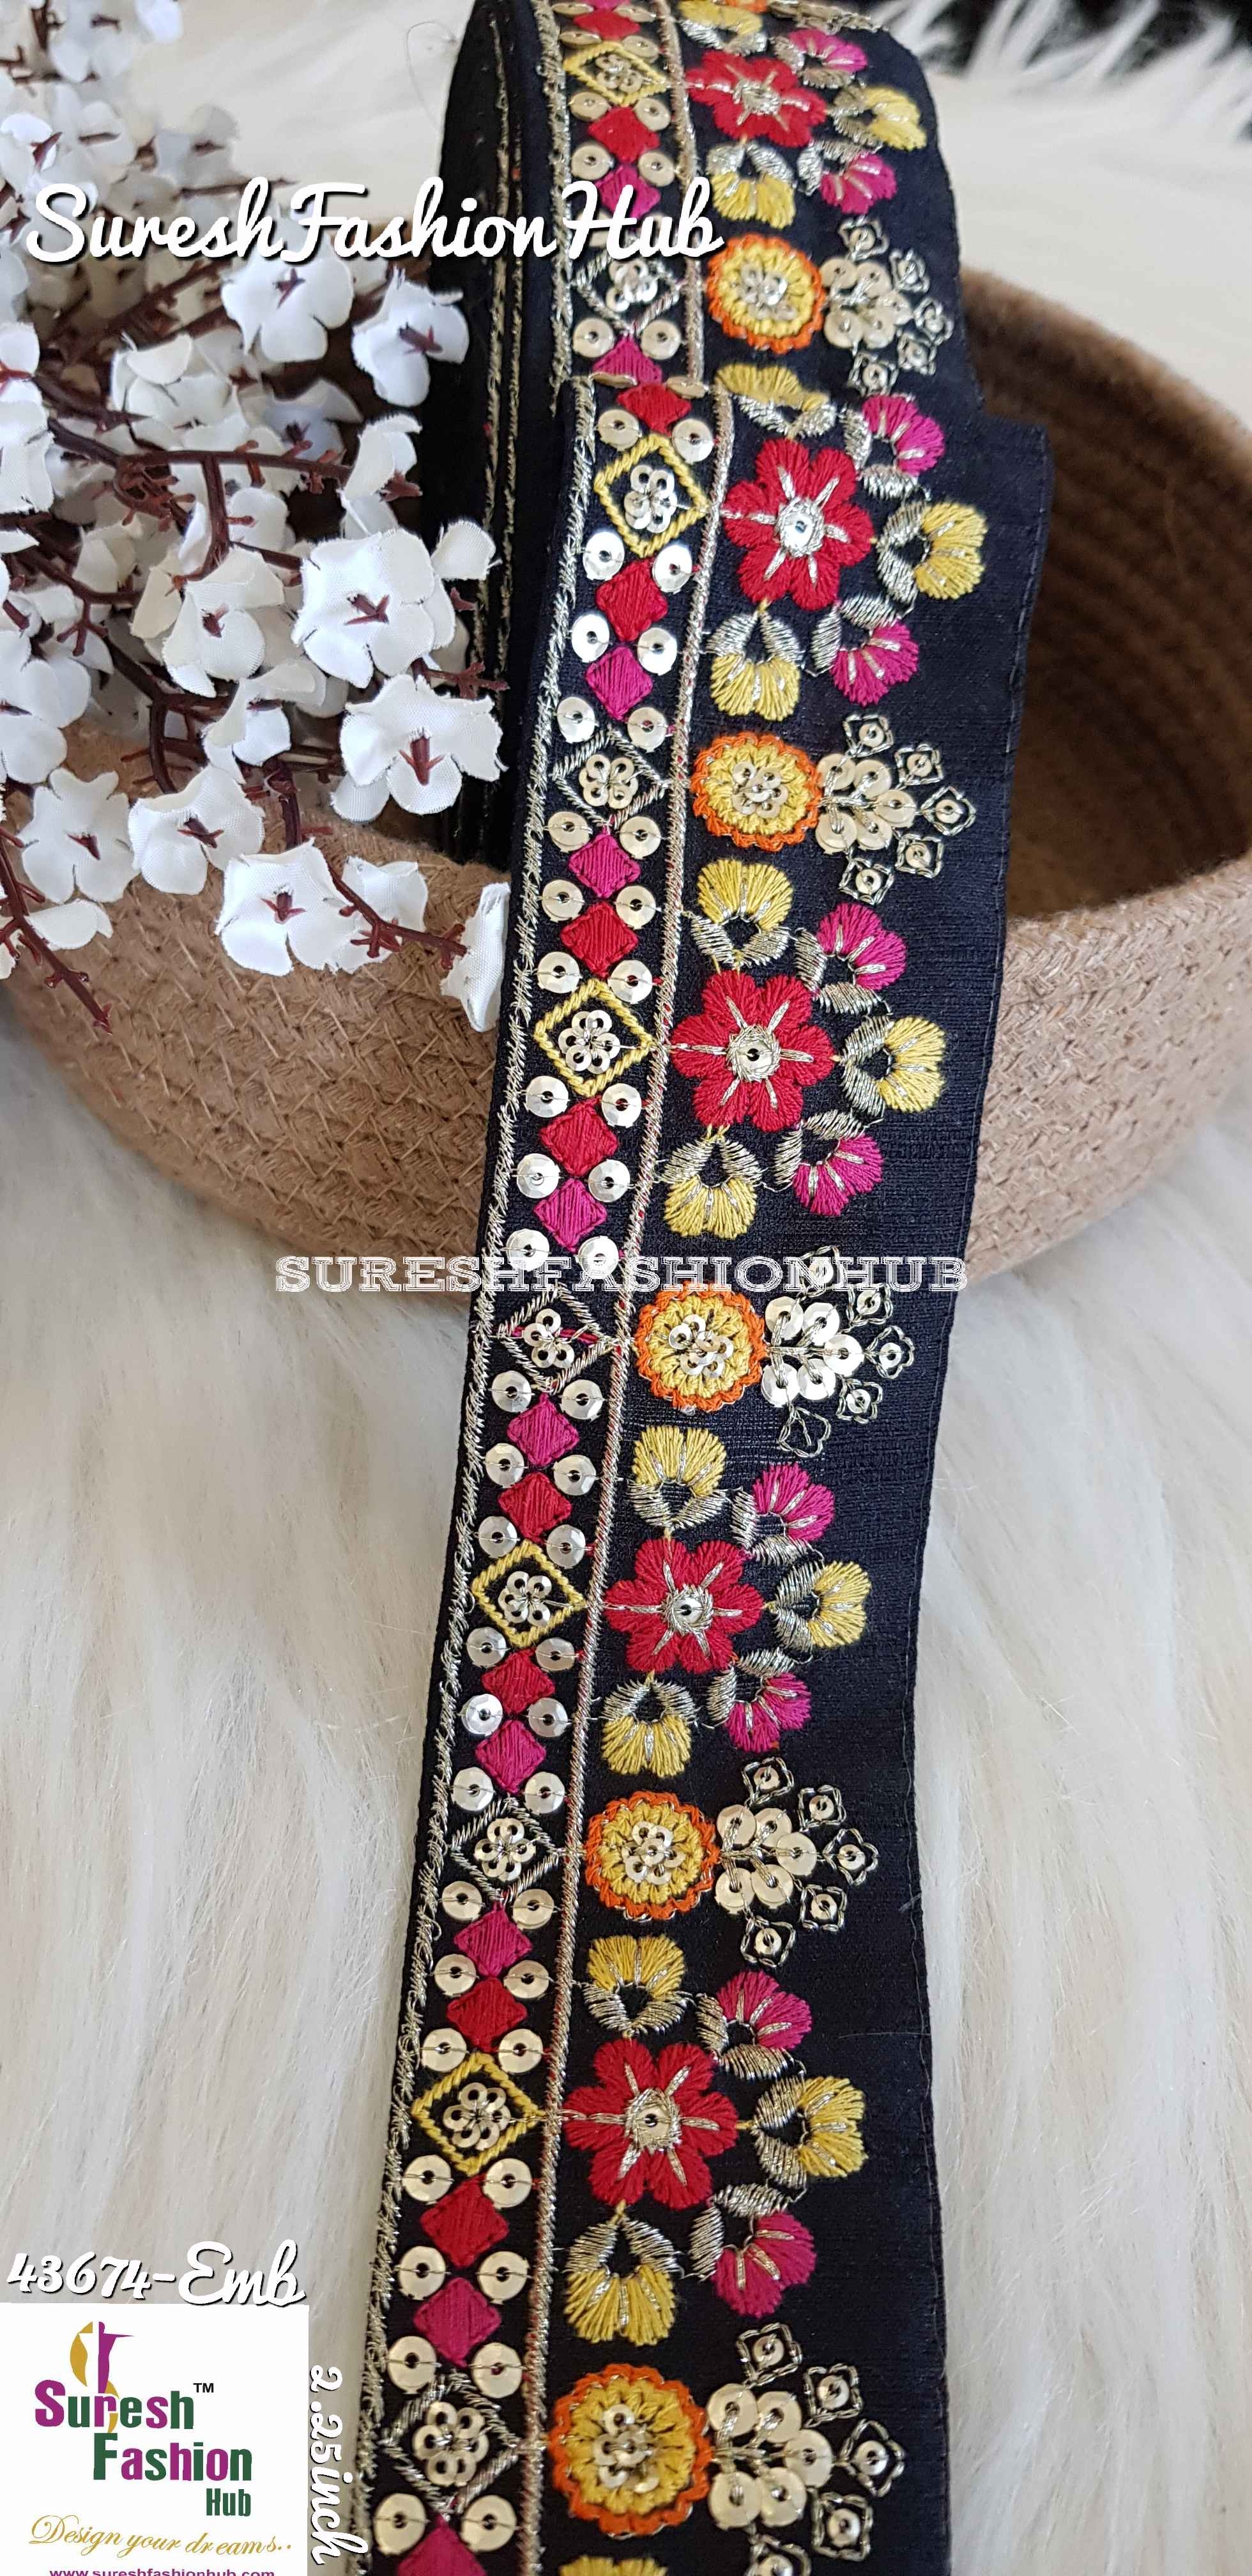 Red Rose Floral Embroidered Lace Trim